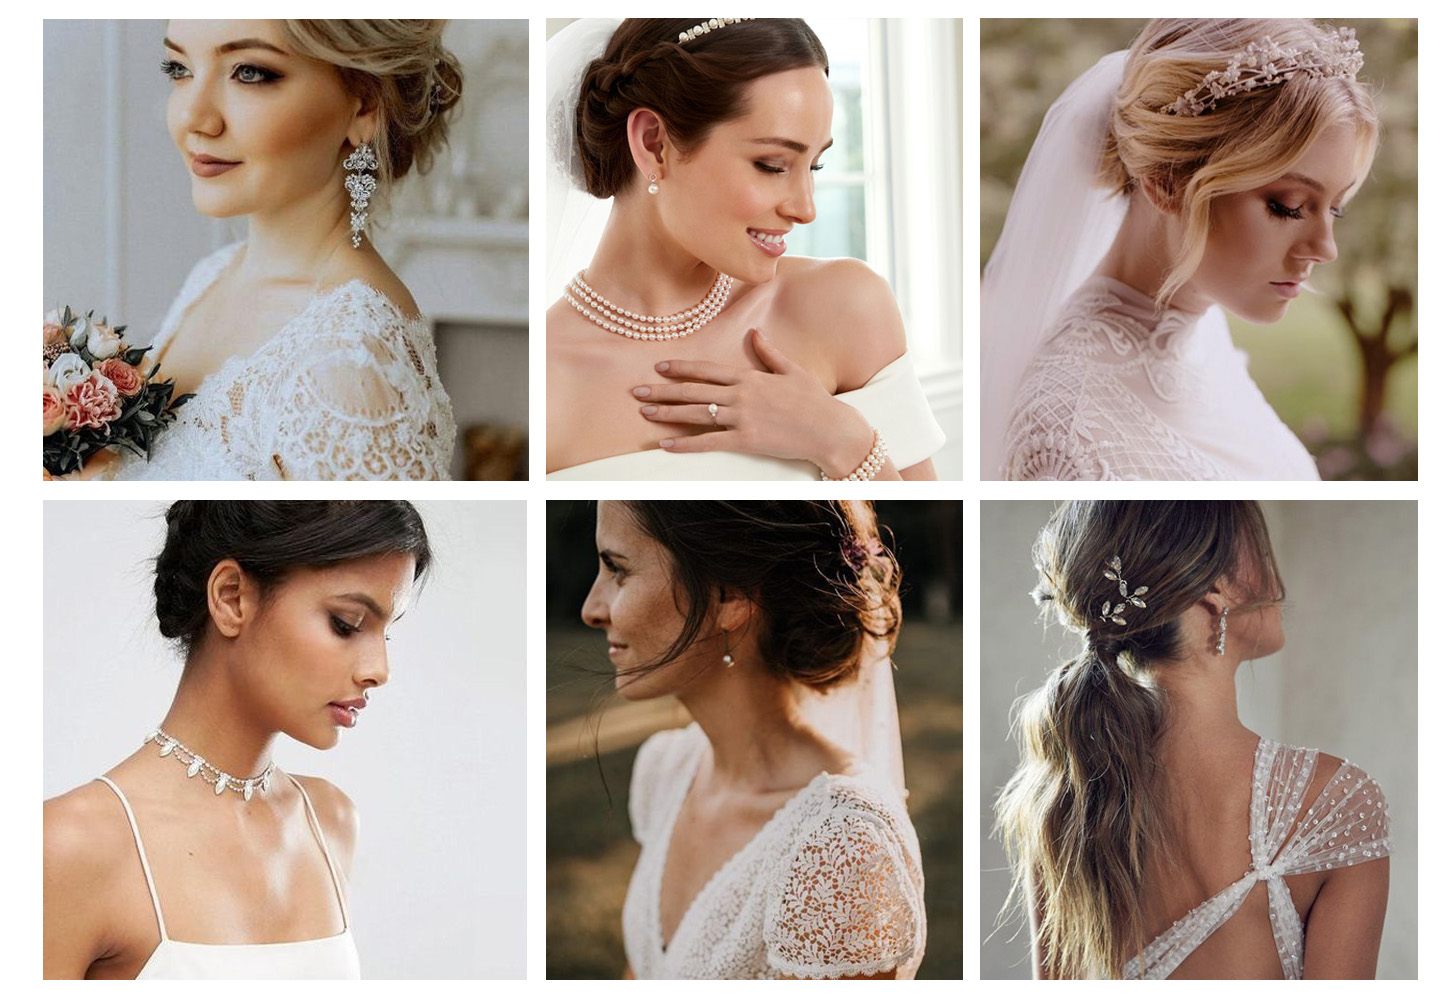 8 Tips for Choosing Your Bridal Hair Accessories